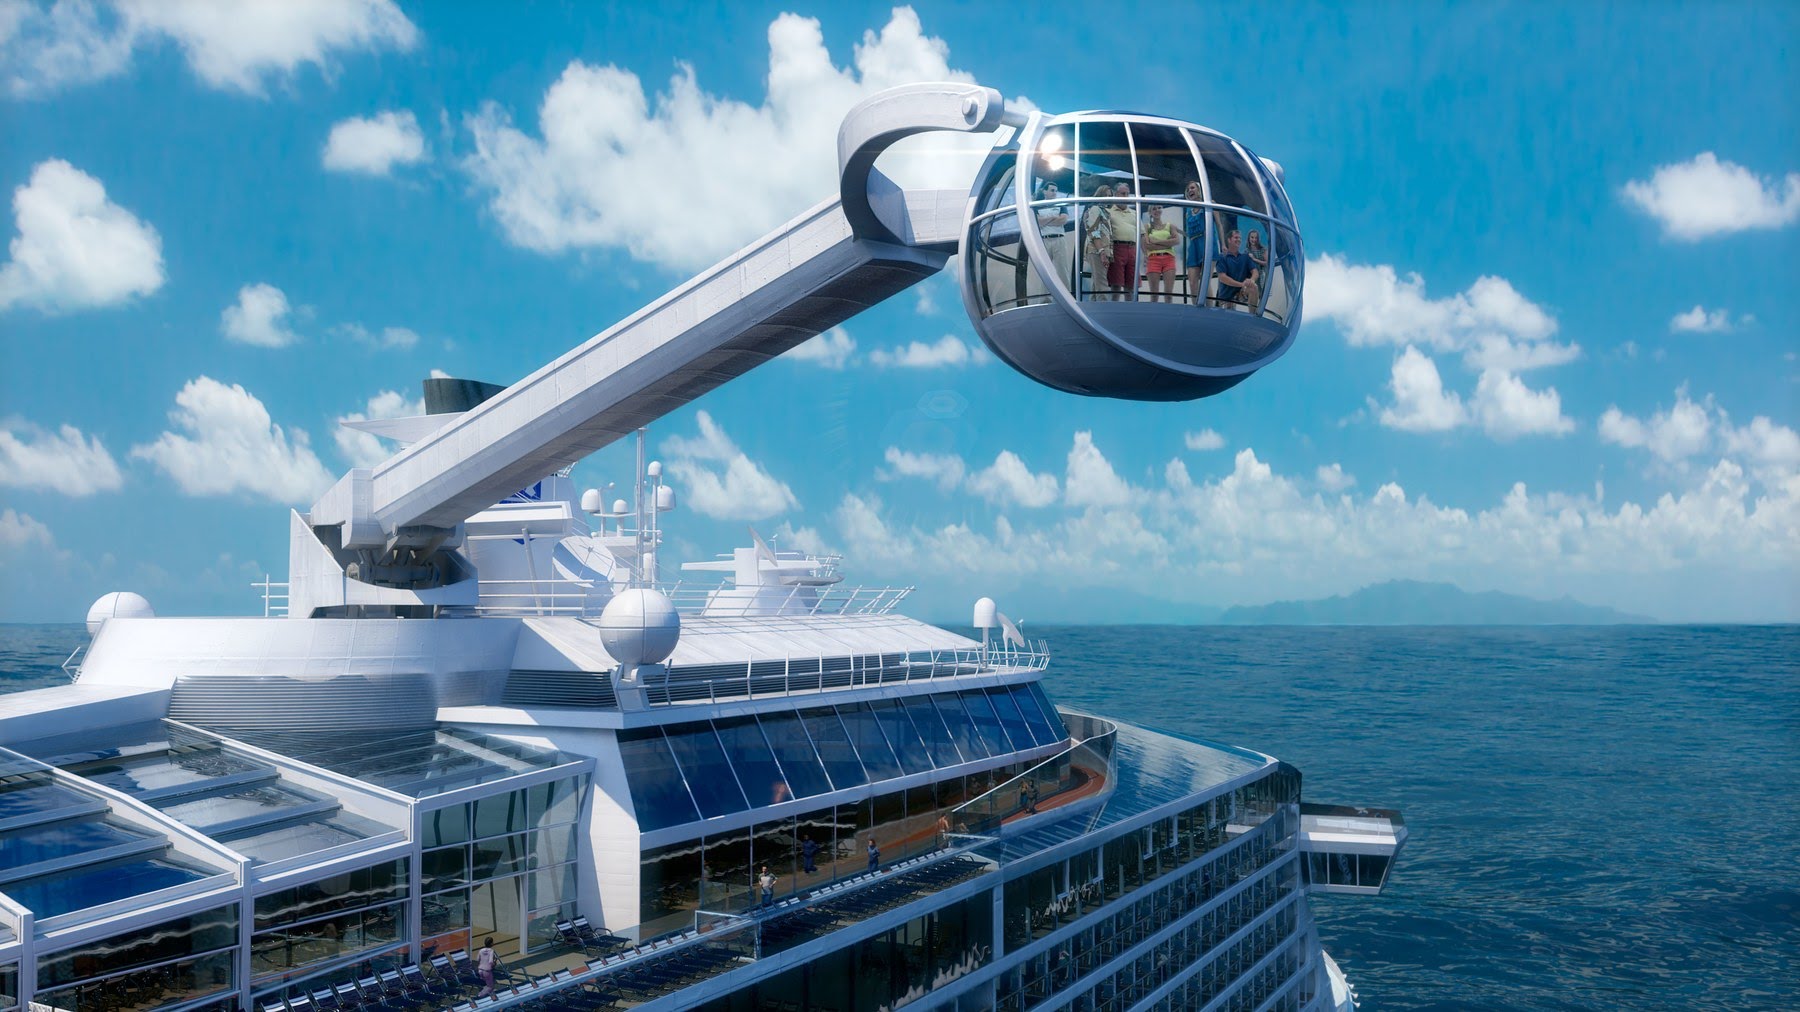 Outrageous things to do on a cruise ship